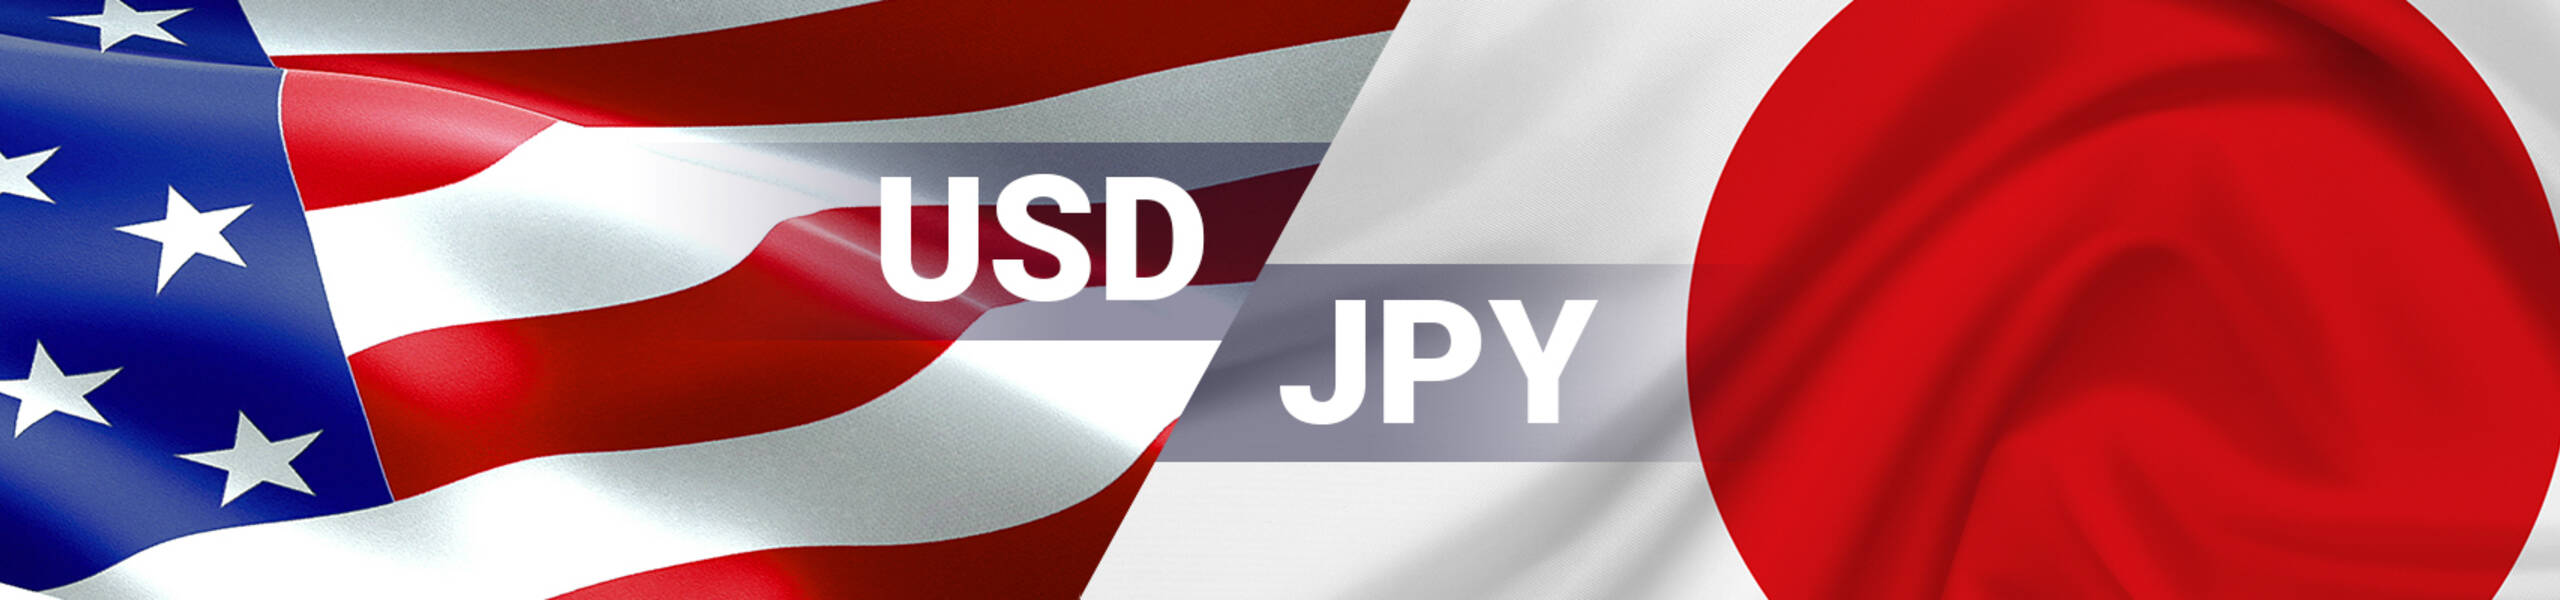 USD/JPY reversed from resistance zone